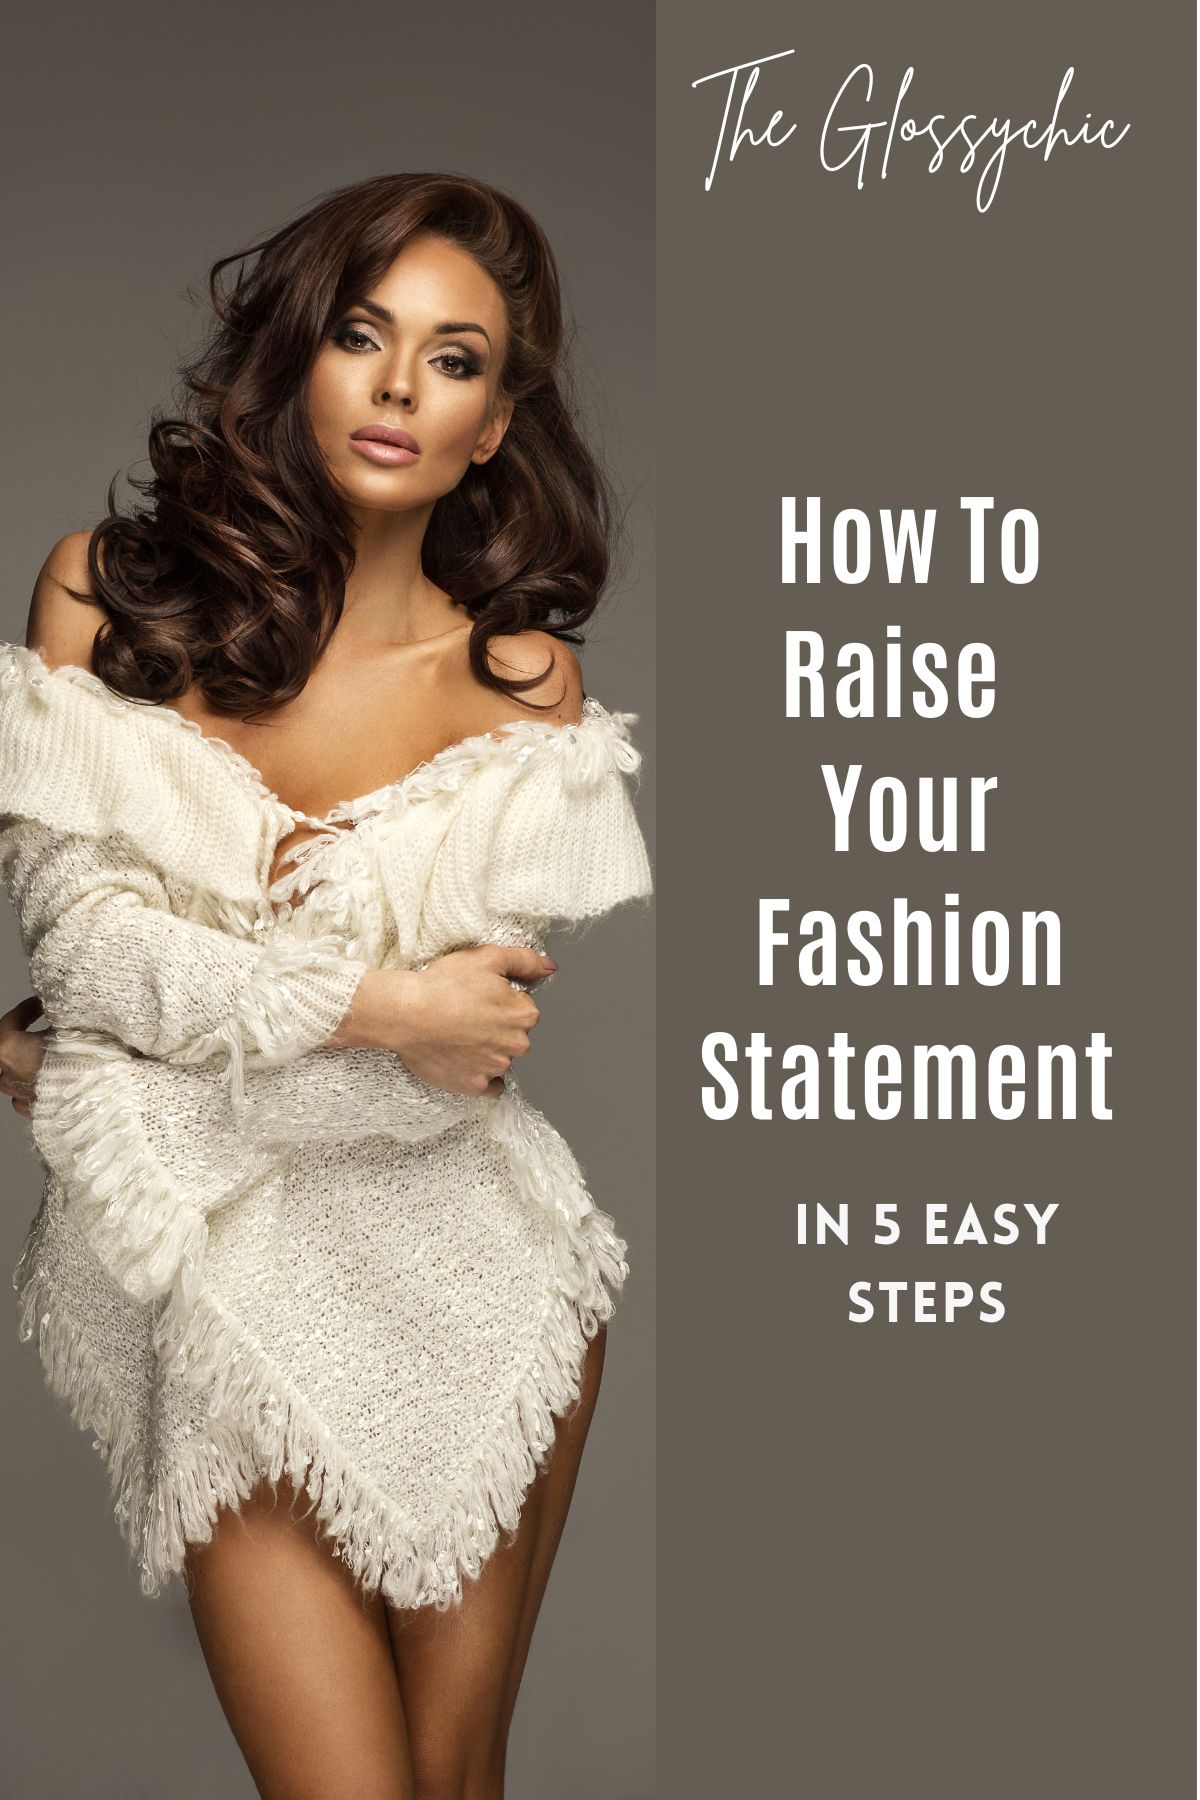 How Can You Raise Your Fashion Statement in 5 Easy Steps